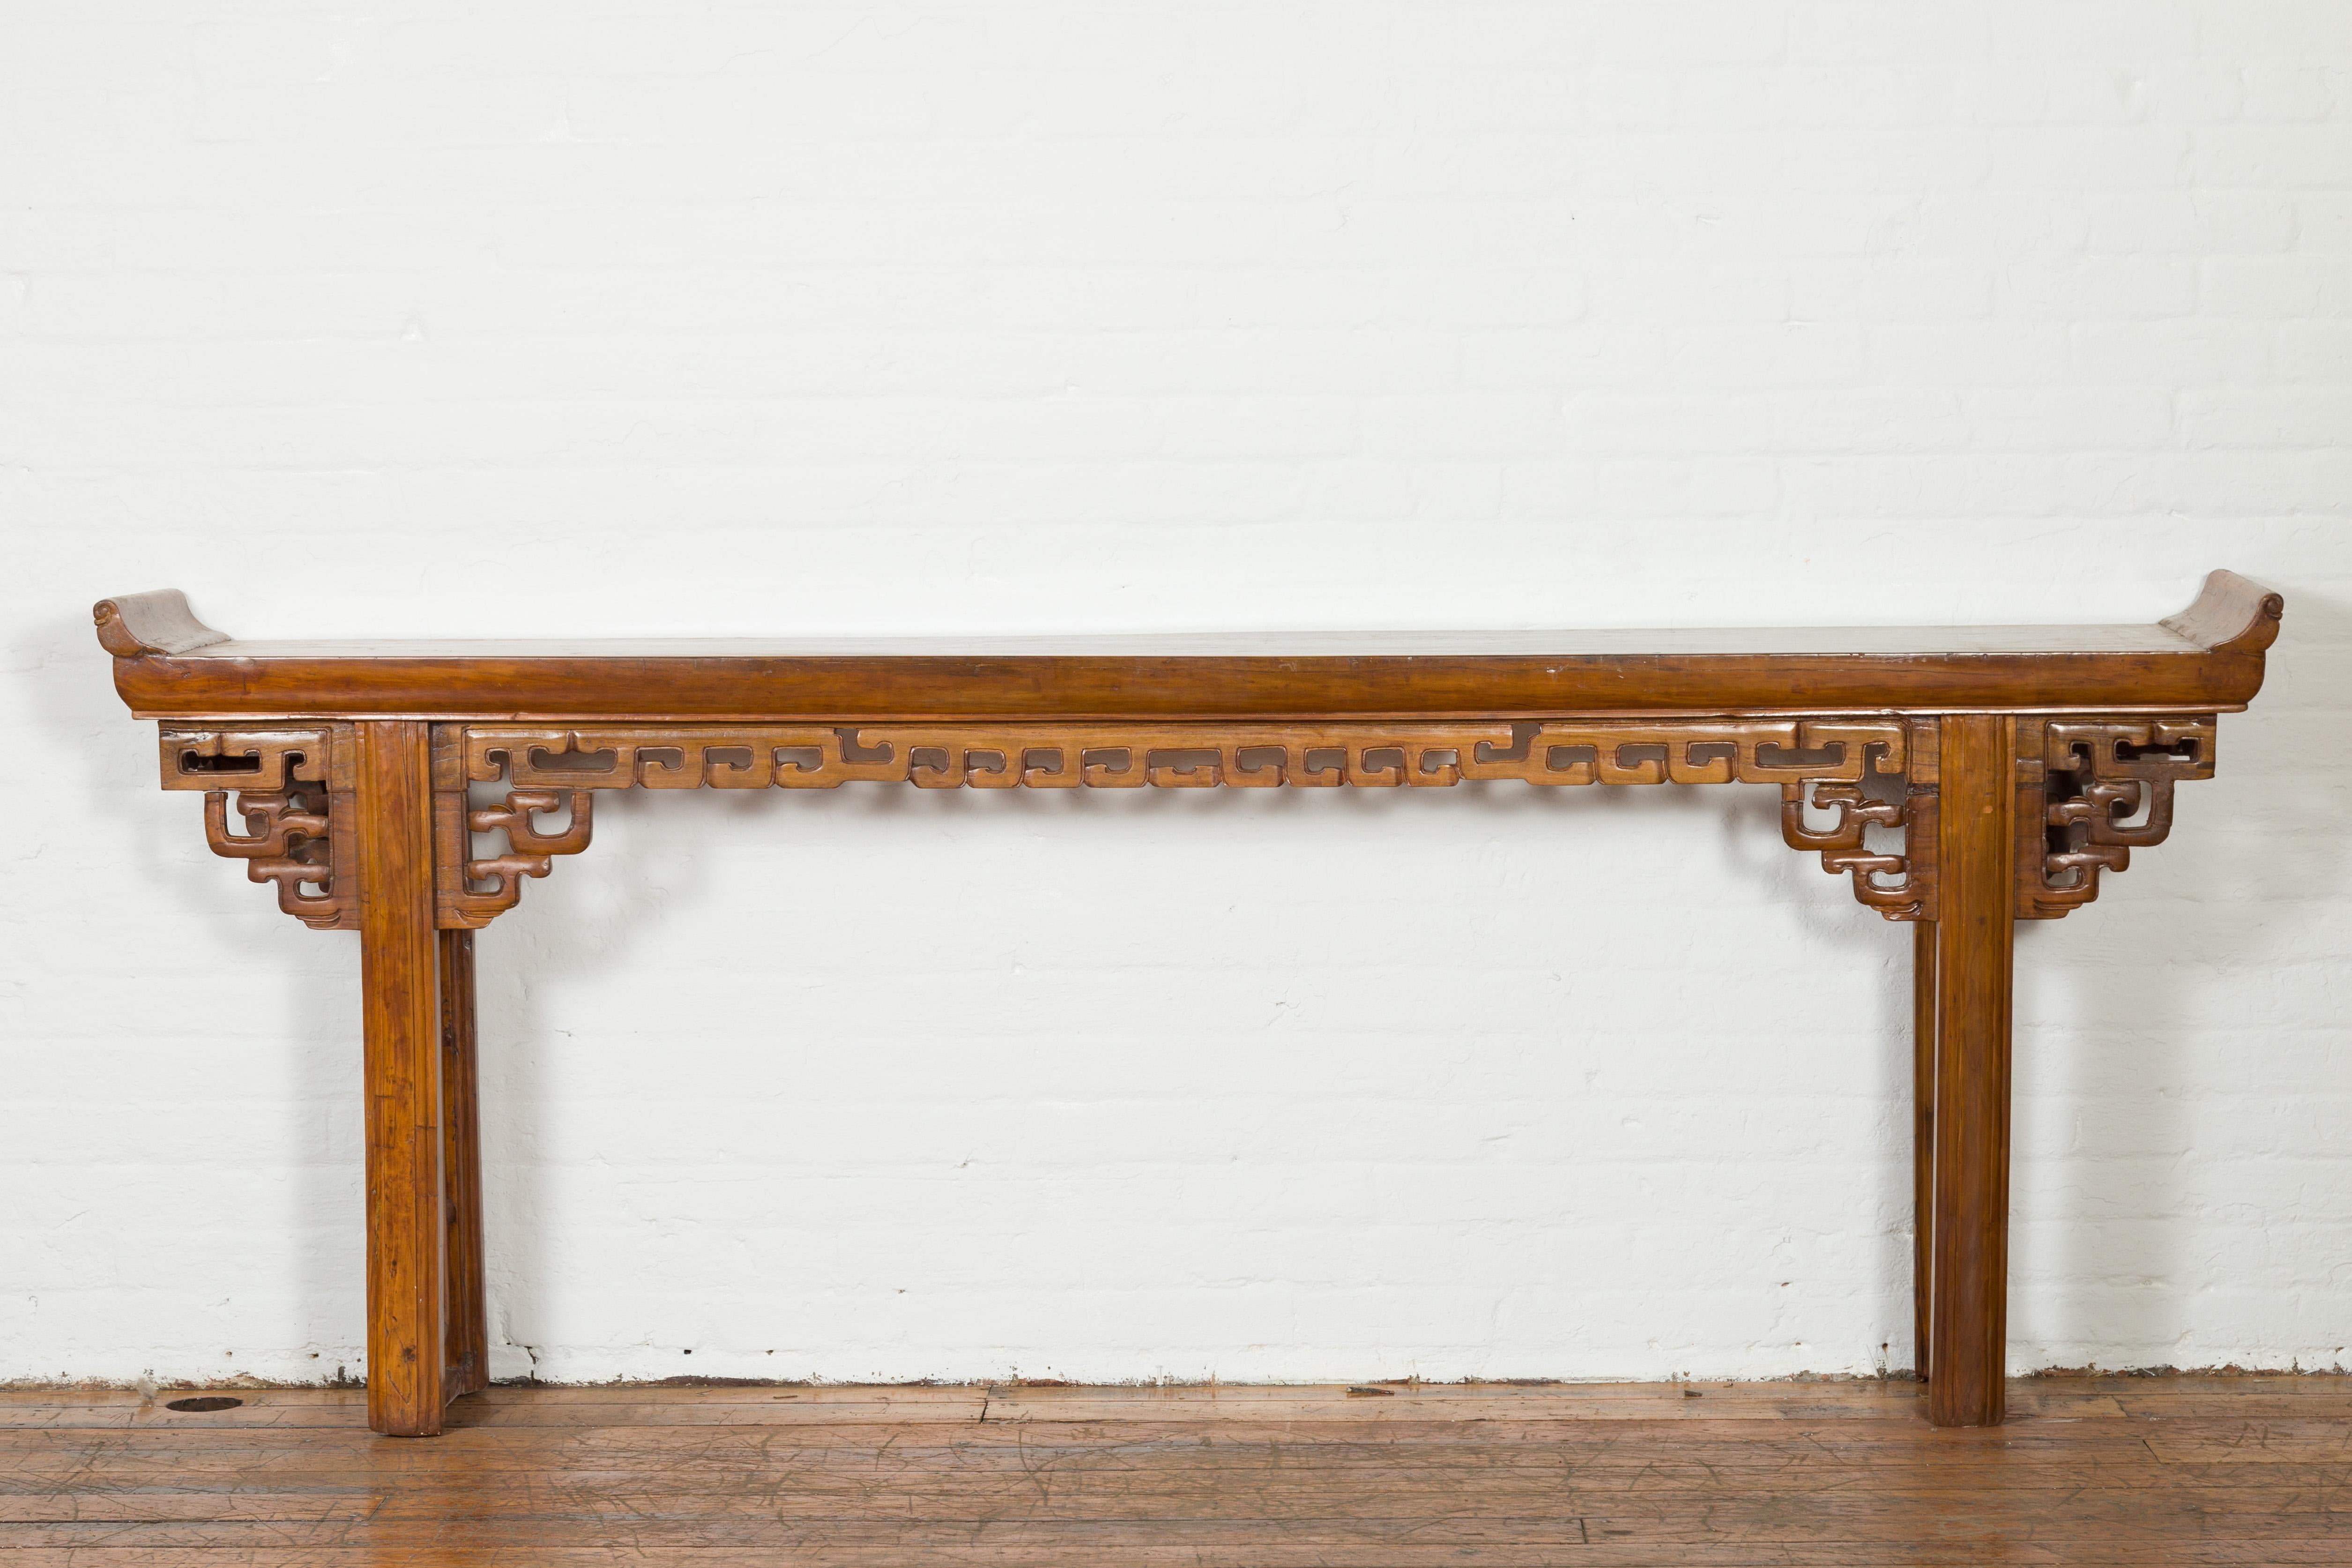 Chinese 19th Century Qing Dynasty Period Altar Console Table with Open Fretwork In Good Condition For Sale In Yonkers, NY